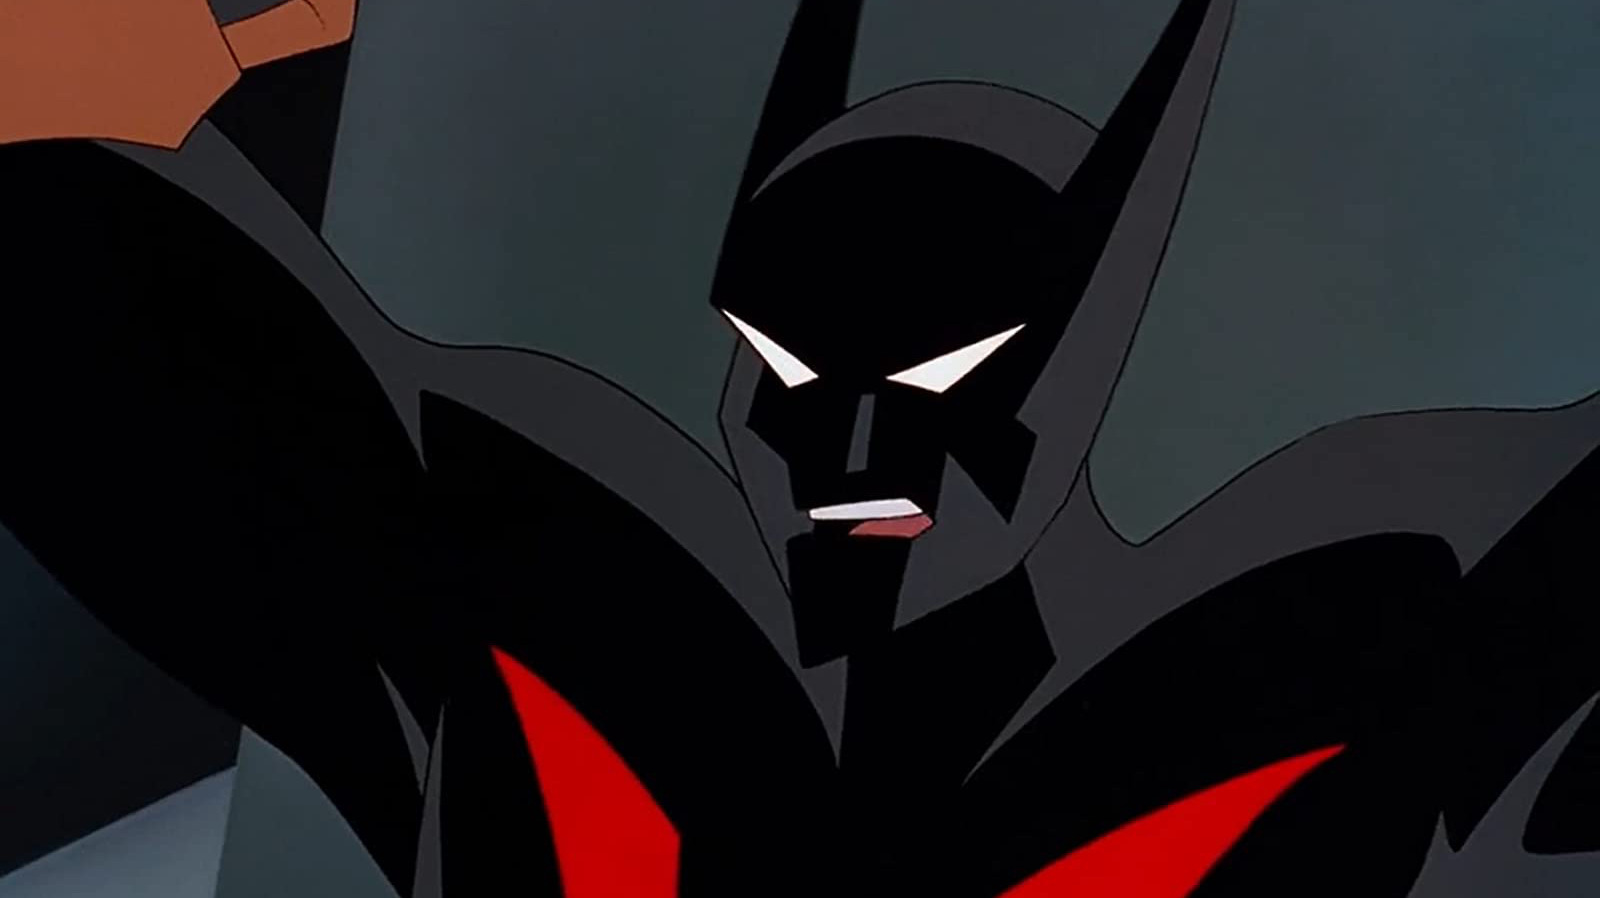 A Tight Deadline Meant Batman Beyond Had To Make Things Up 'On The Fly'